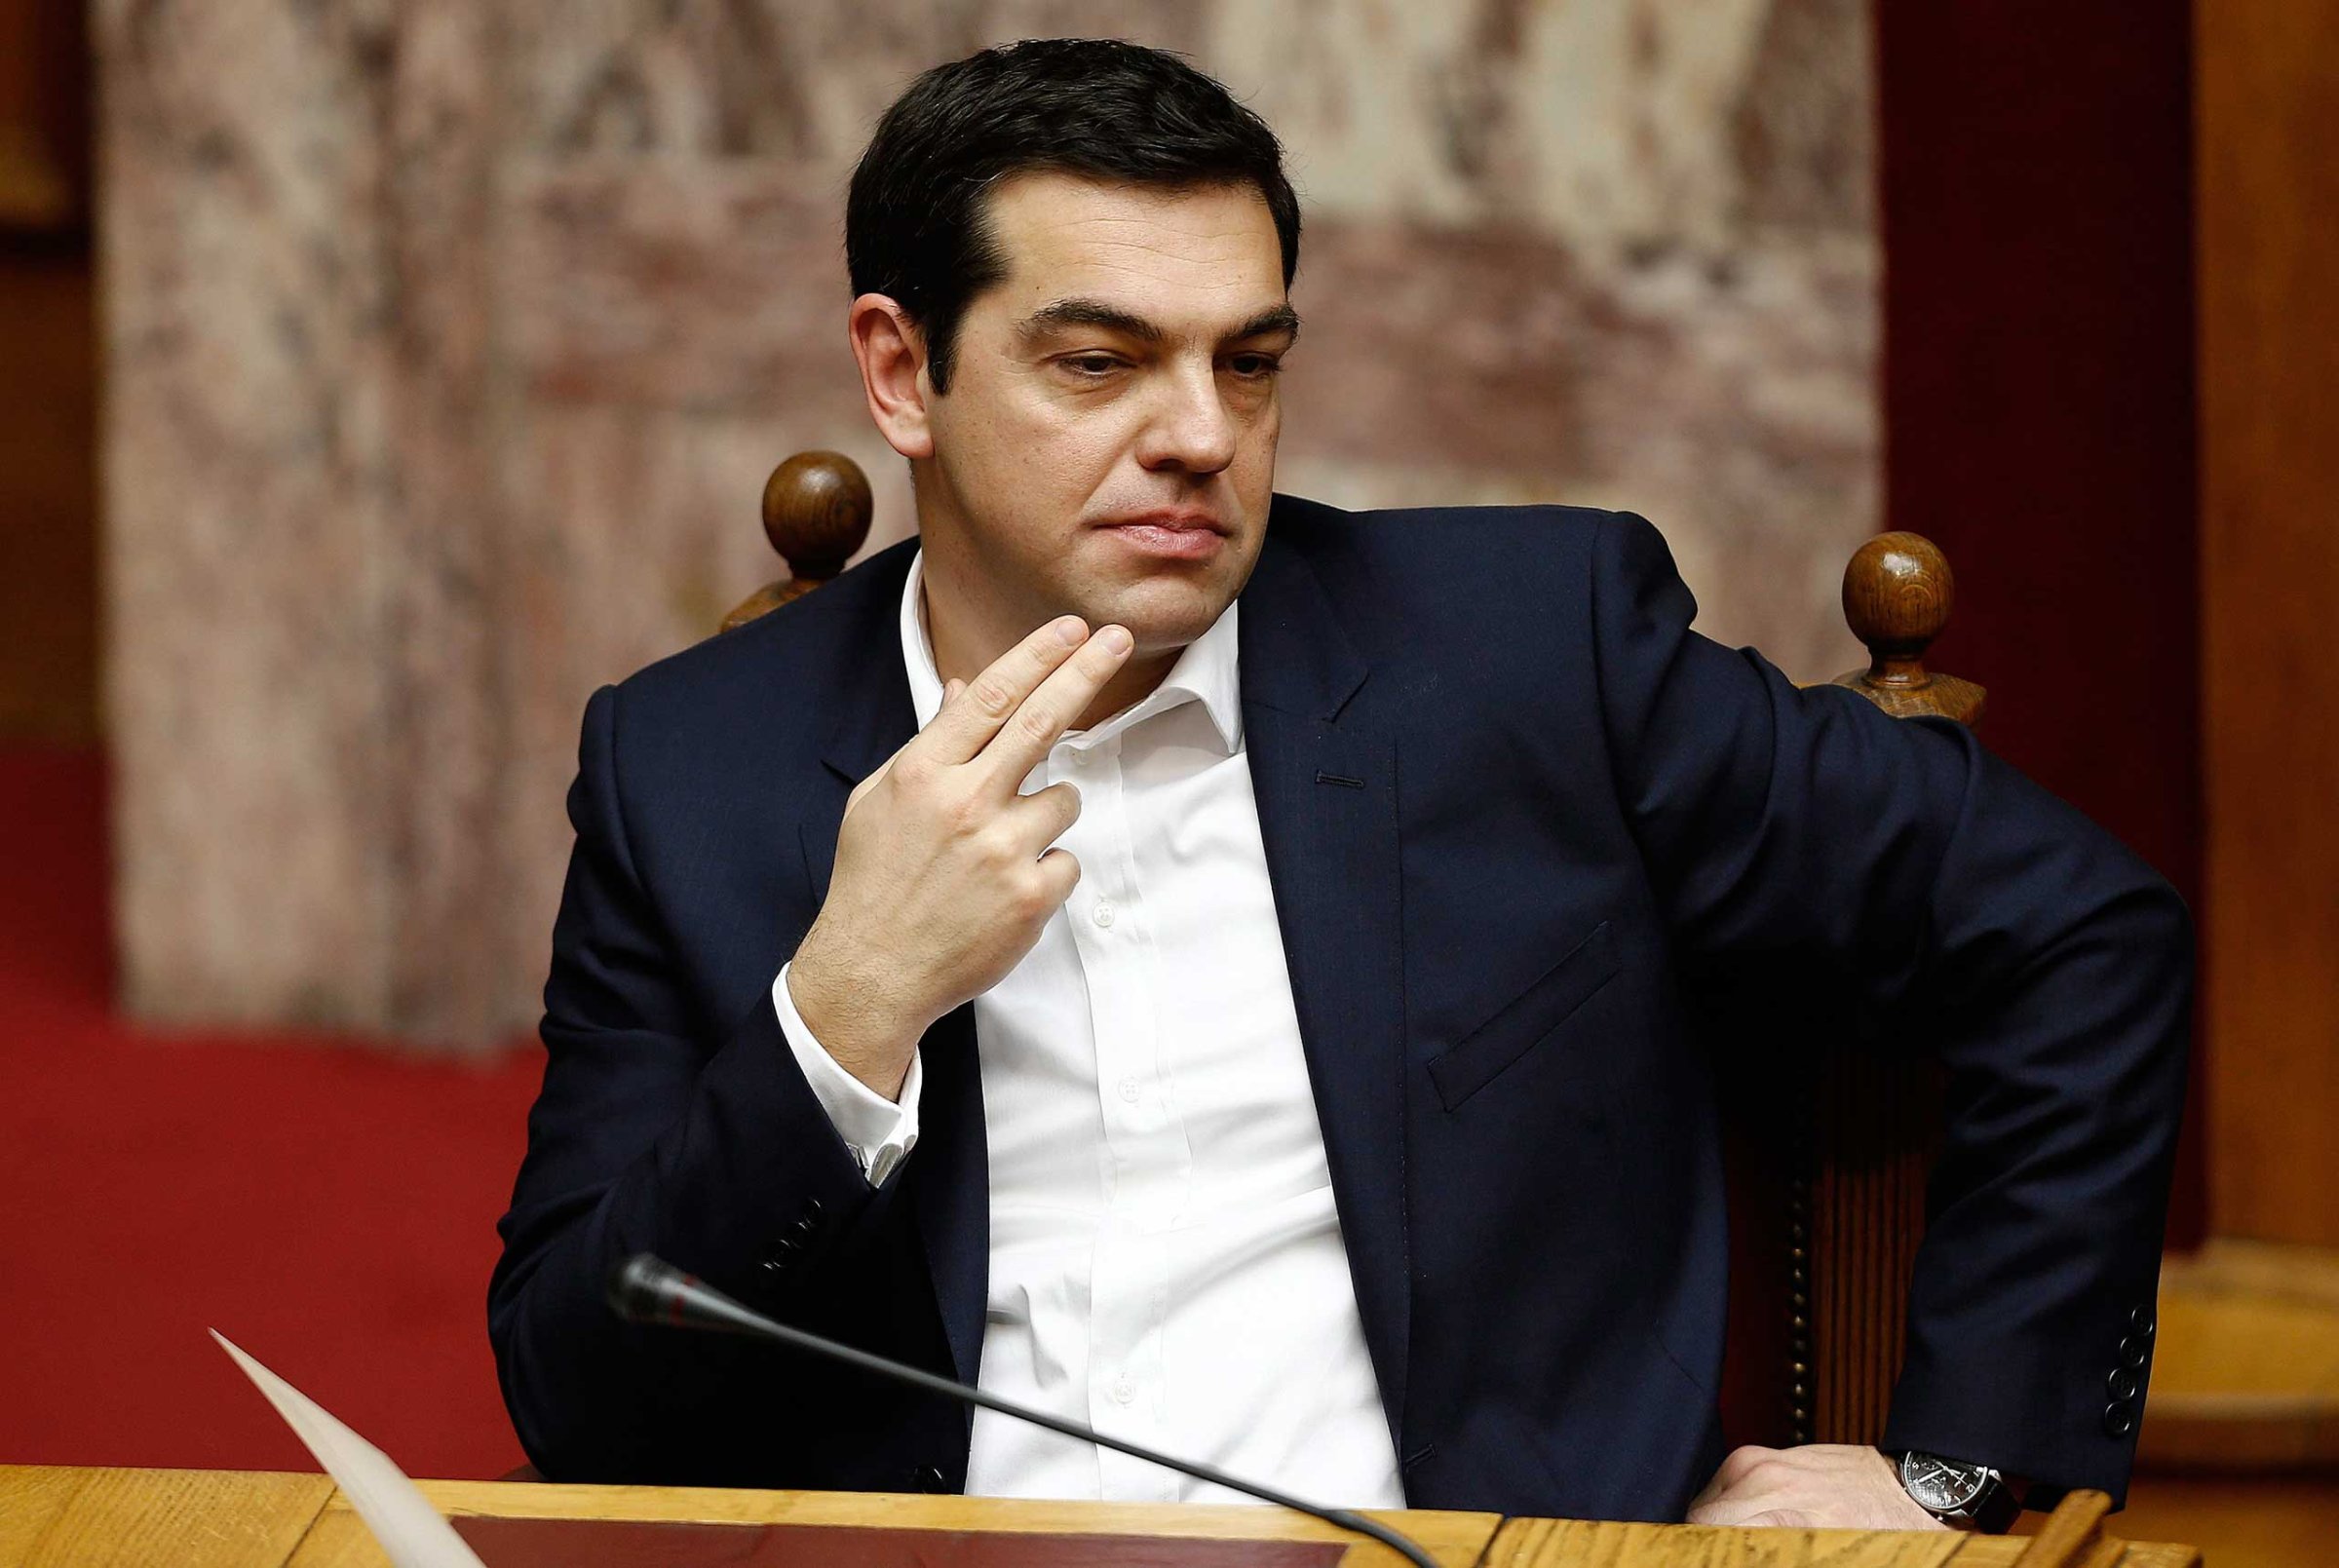 Greek Prime Minister Alexis Tsipras looks on before swearing in ceremony of the new deputies that were elected in the January 25 national polls, in Athens, Feb. 5,2015.